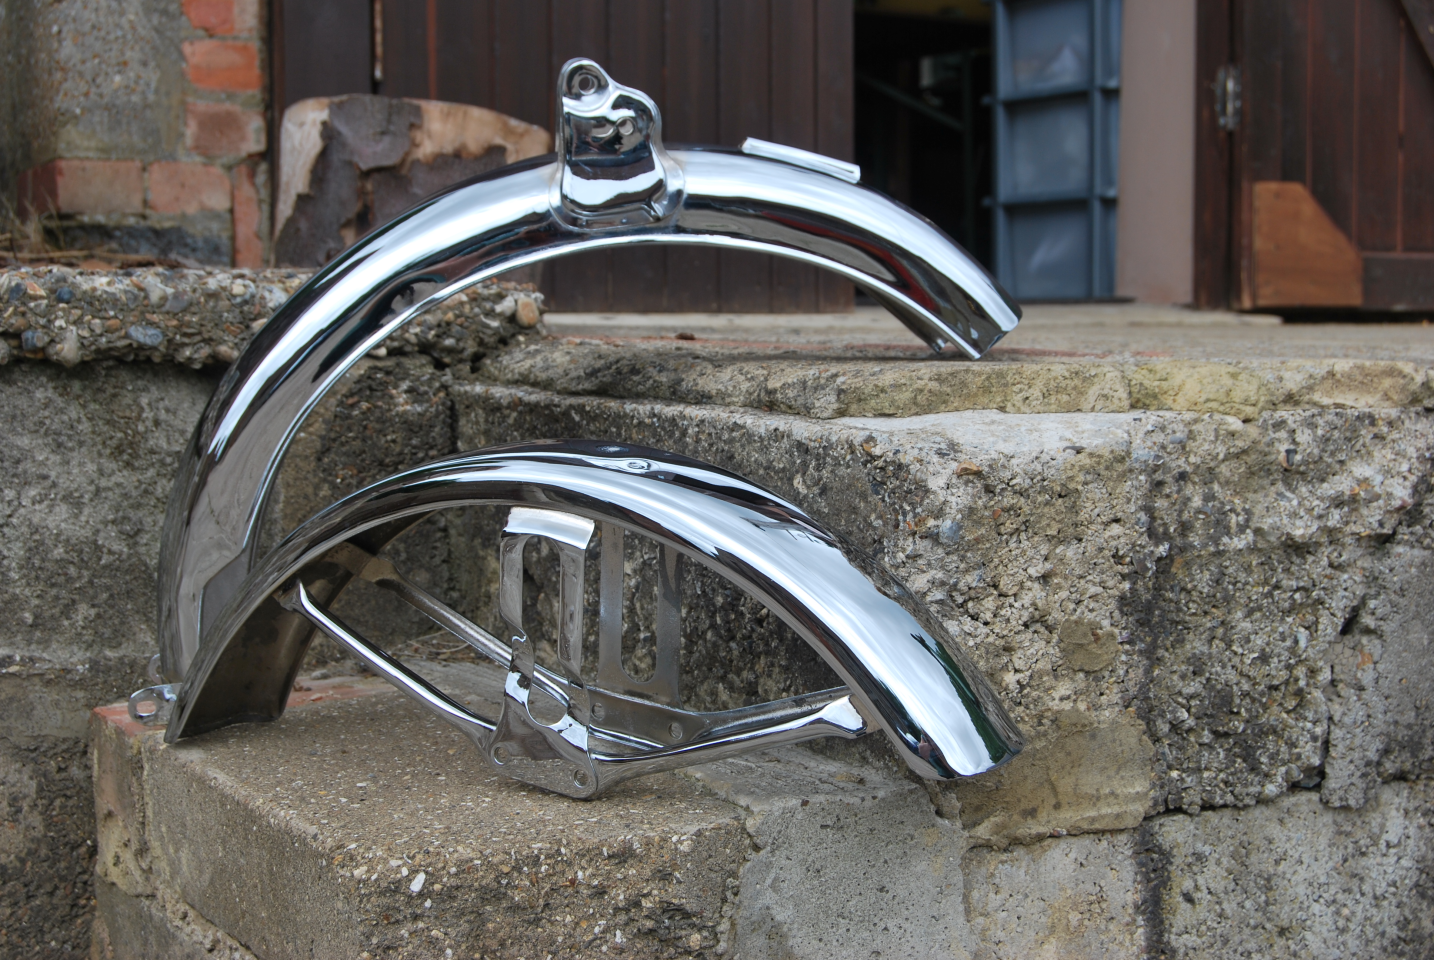 Picture of a motorcycle mudguards re chromed.